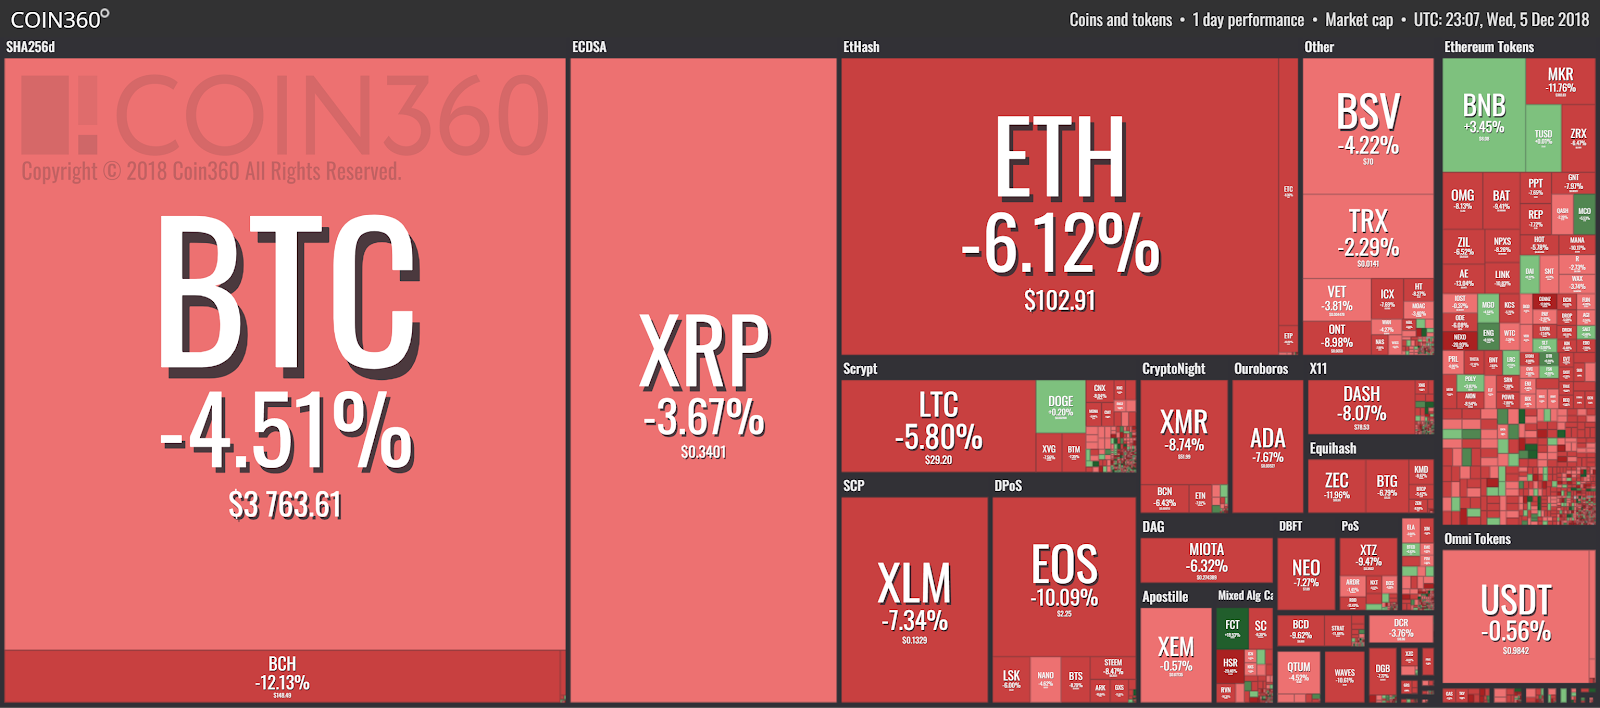 Market visualization from Coin360.io